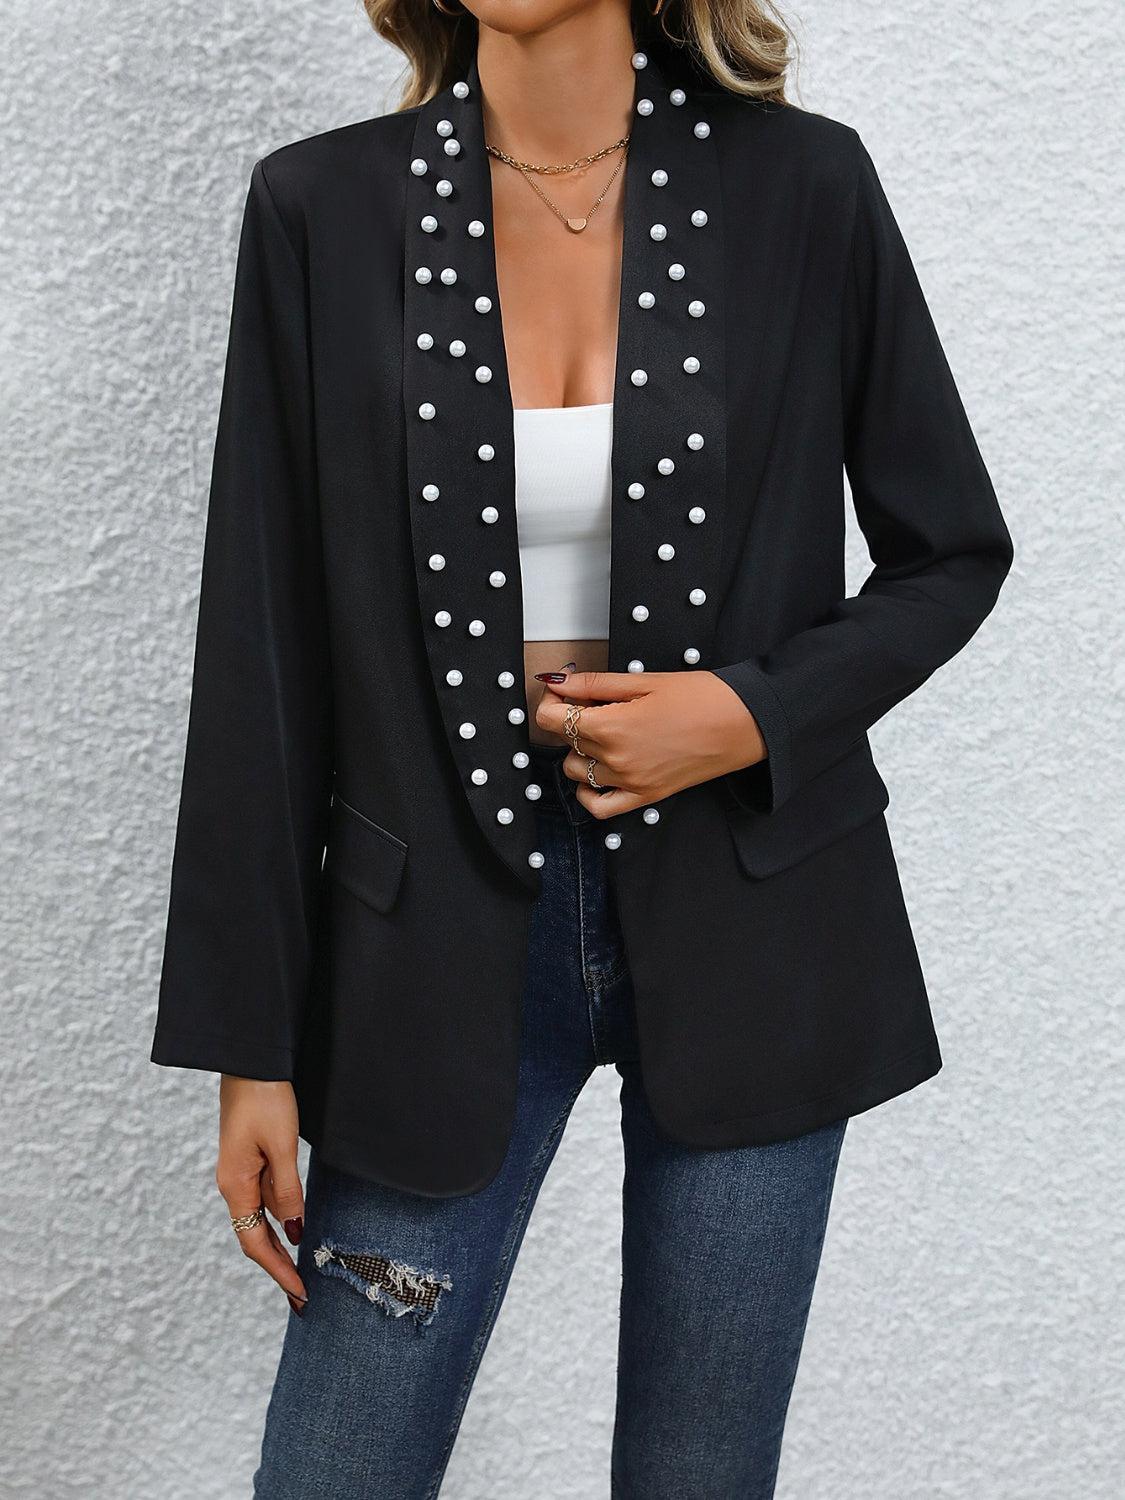 a woman wearing a black jacket with white polka dots